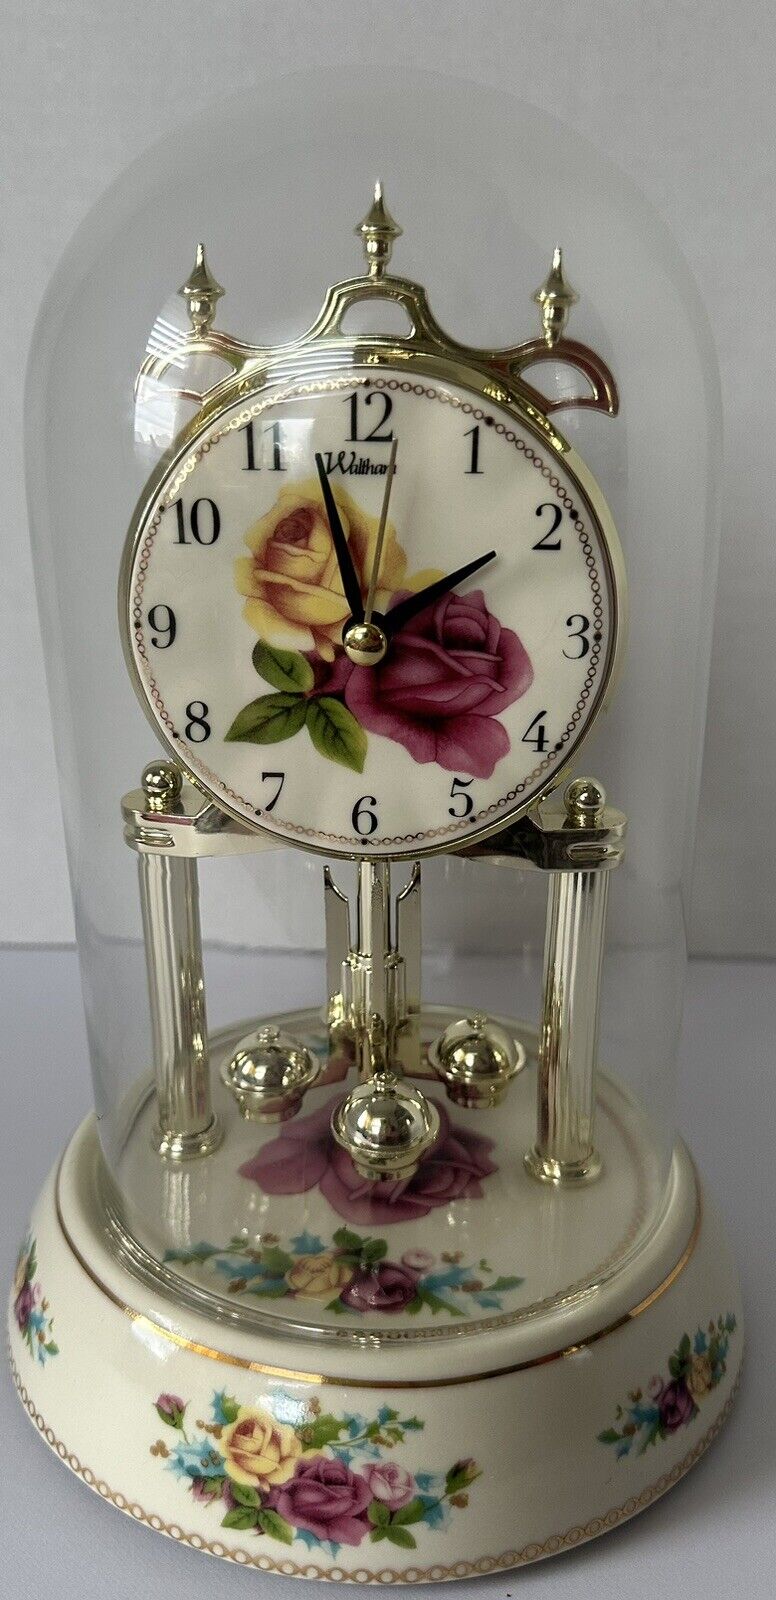 Waltham Roses Westminster Chime Anniversary Clock Porcelain Base Glass Dome